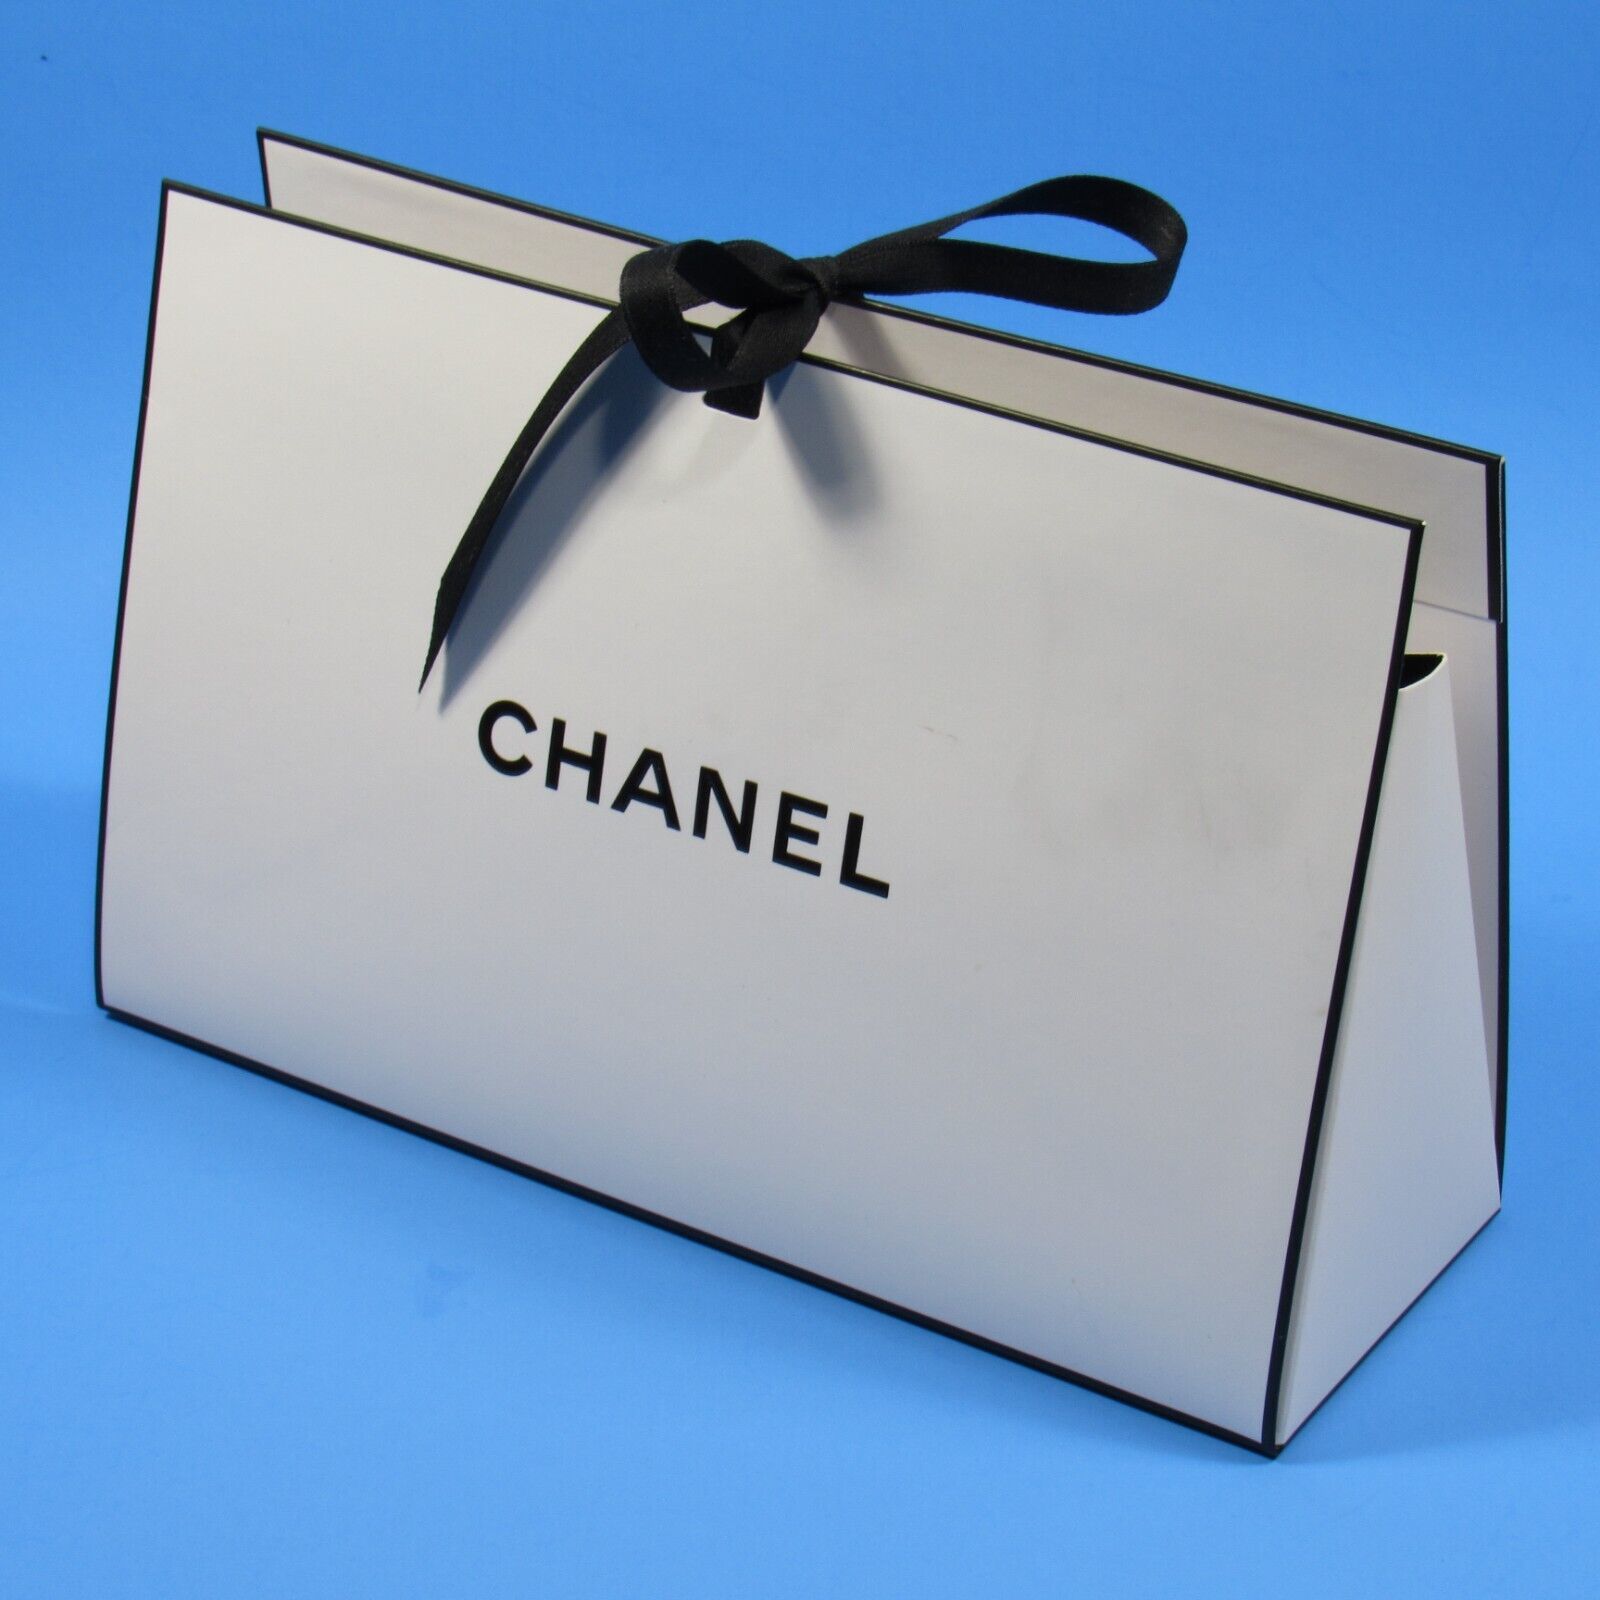 Chanel Small Gift Bag White 9" x 5 1/2" x 3" - $15.00